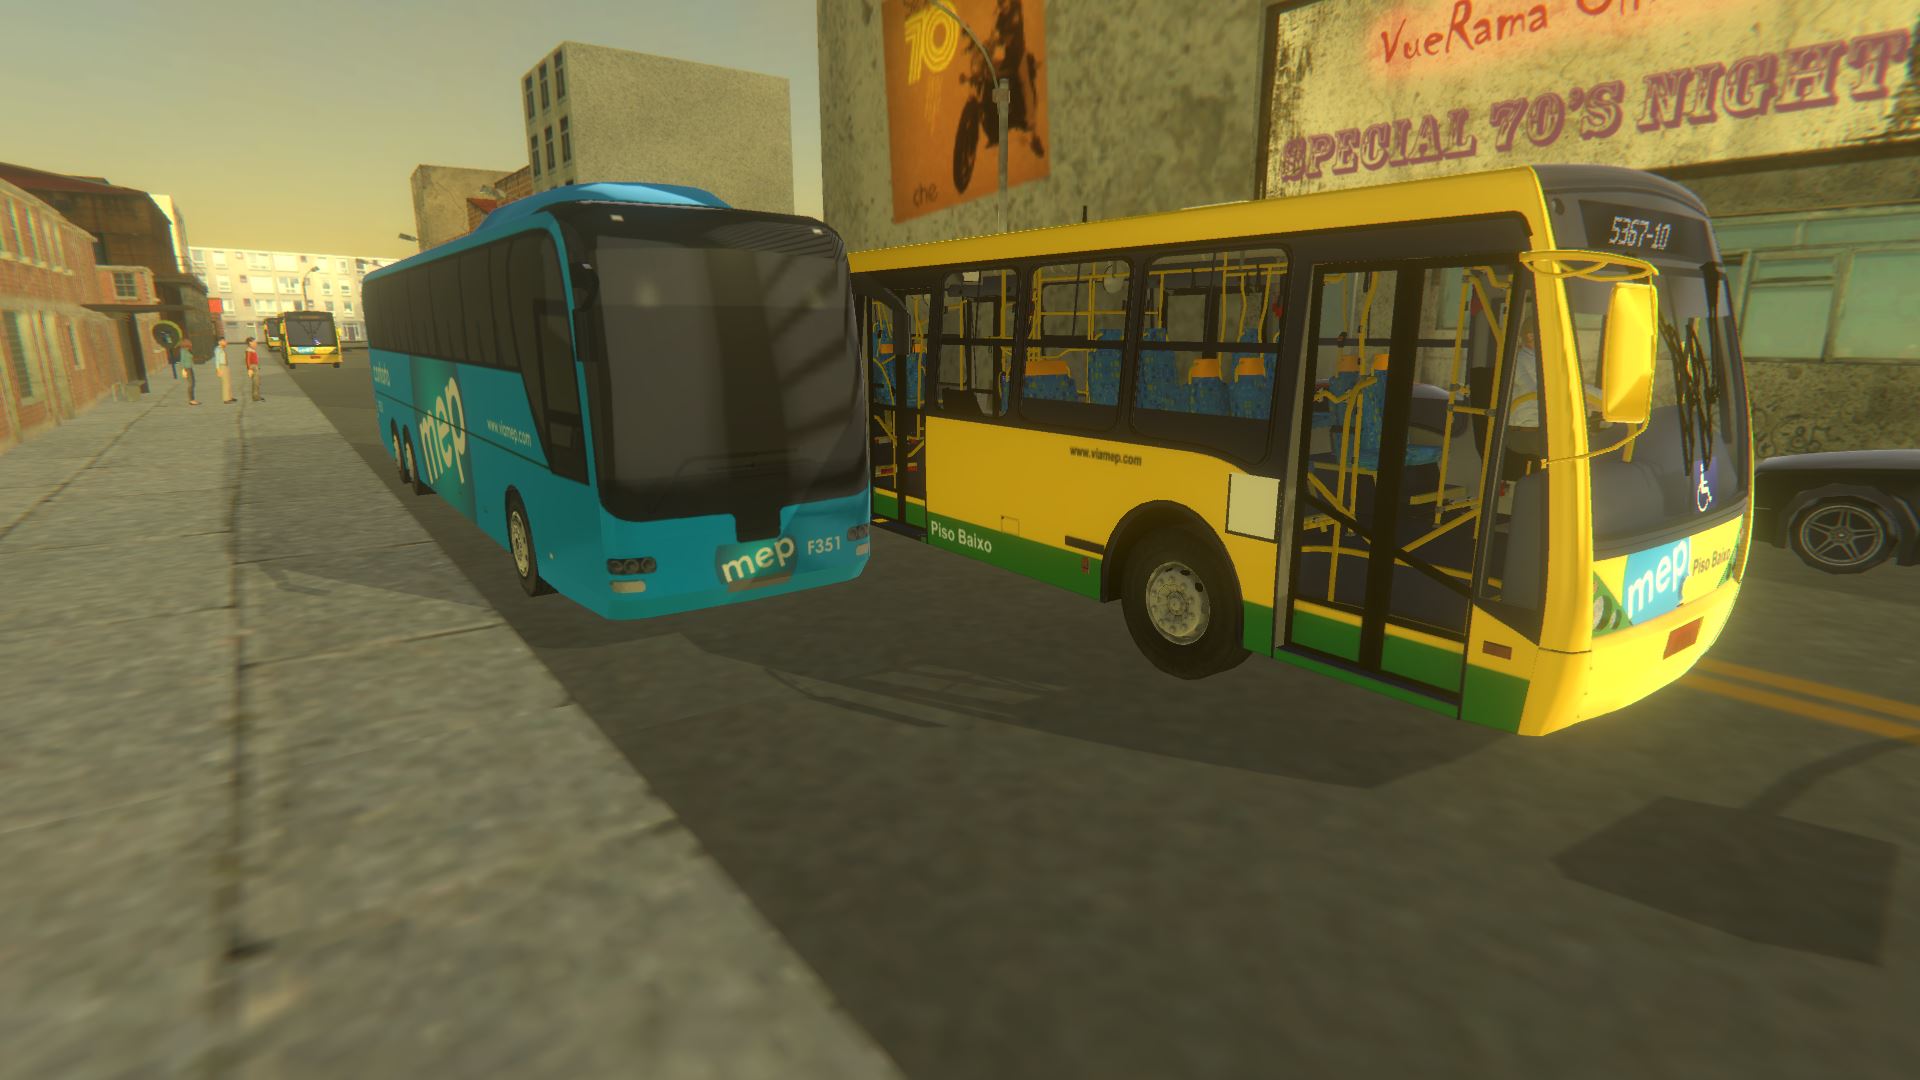 Proton Bus Simulator - How To Move & Drive Bus + Breakdown of Buttons